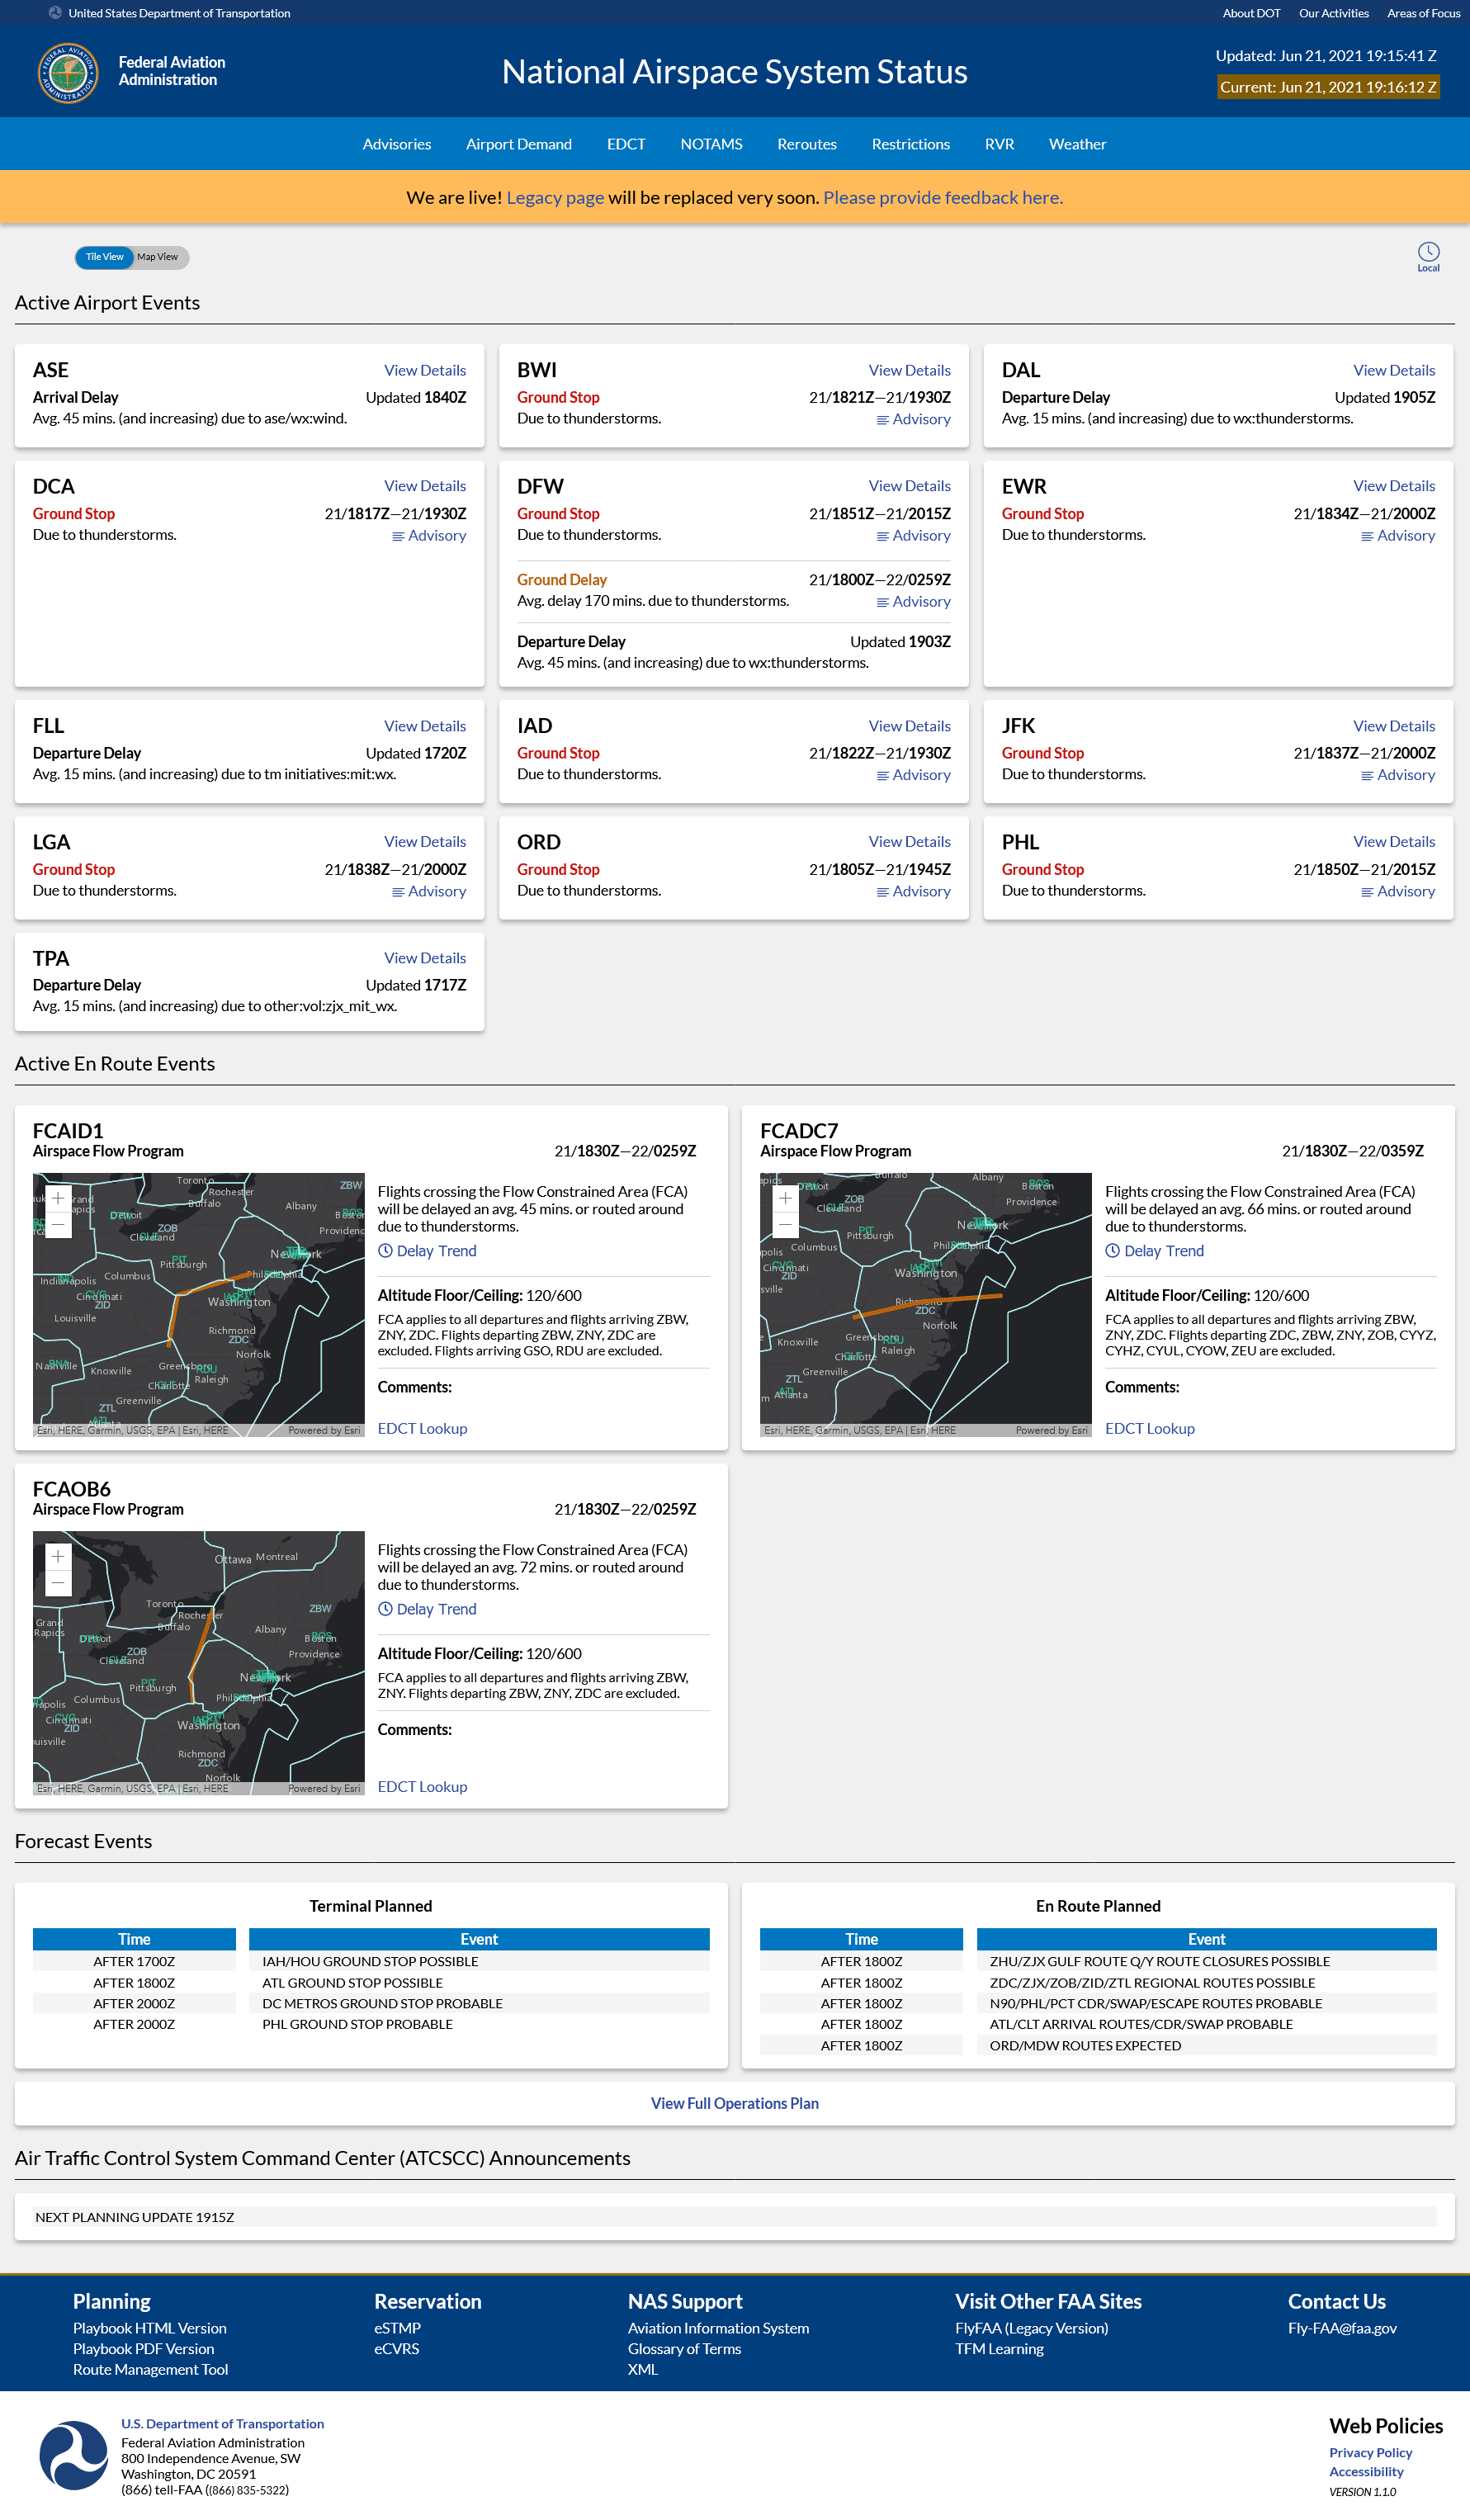 A busy day with 10+ events depicted in NAS.